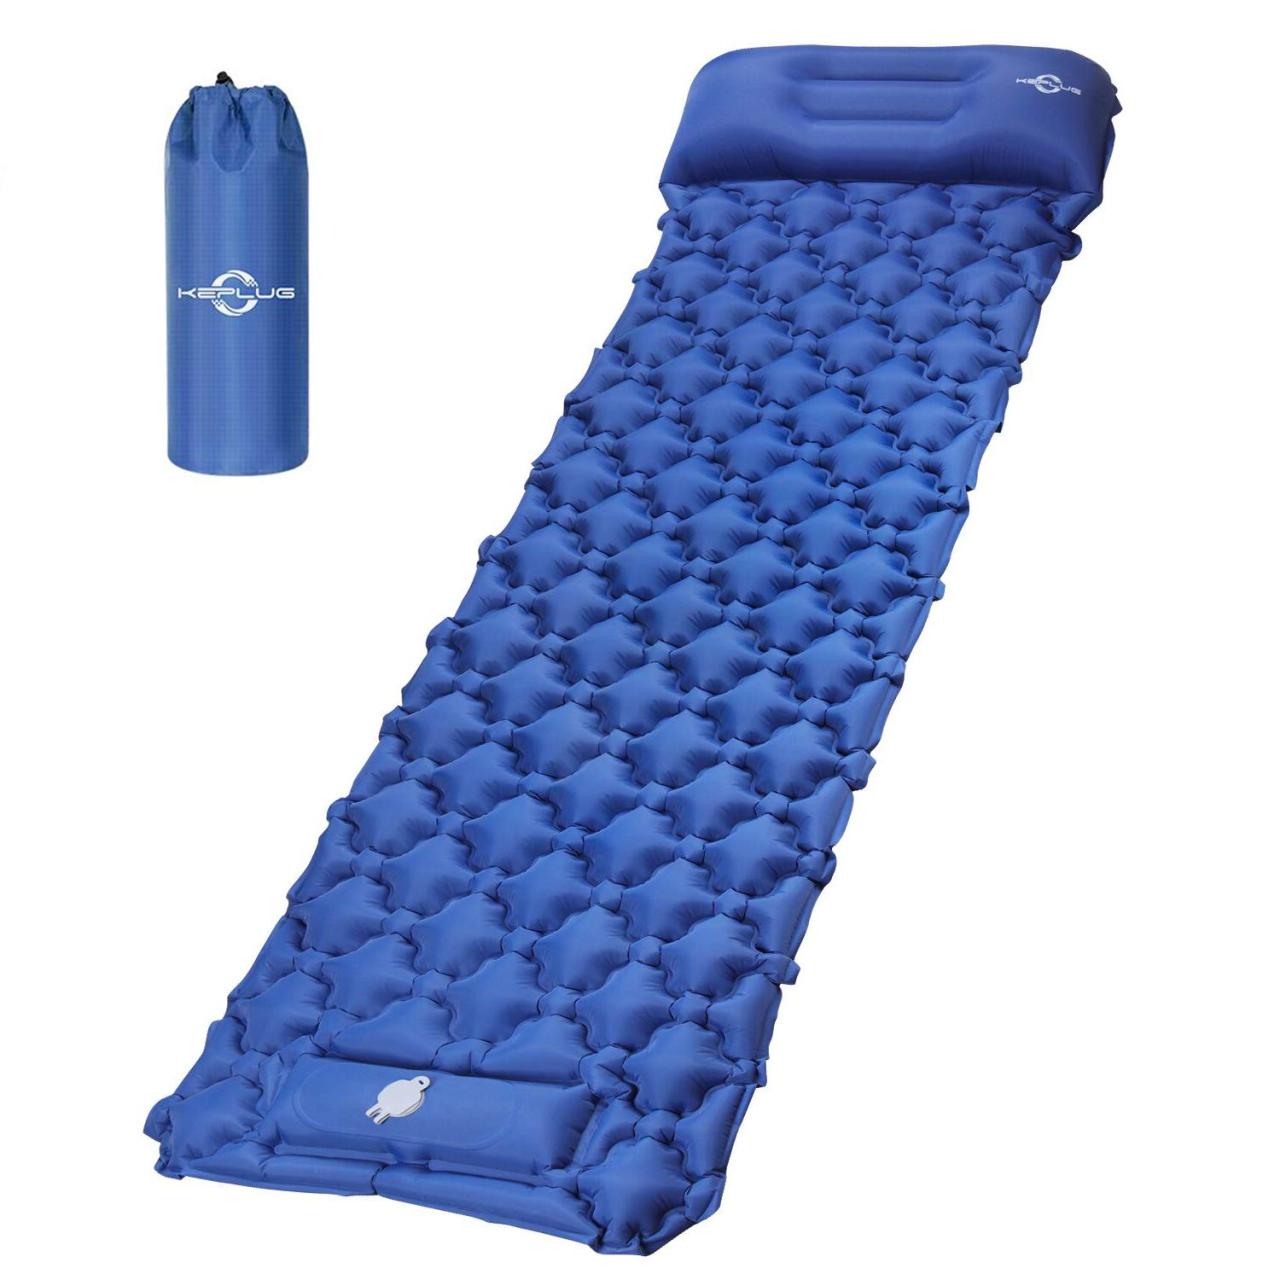 Amazon.Com : Keplug Inflatable Sleeping Pad For Camping, Ultralight  Waterproof Sleeping Mat W/Pillow, Foot Pump Quick Inflation & Deflation,  Thick Air Mattress For Backpacking Hiking Tent Travel - Blue : Sports &